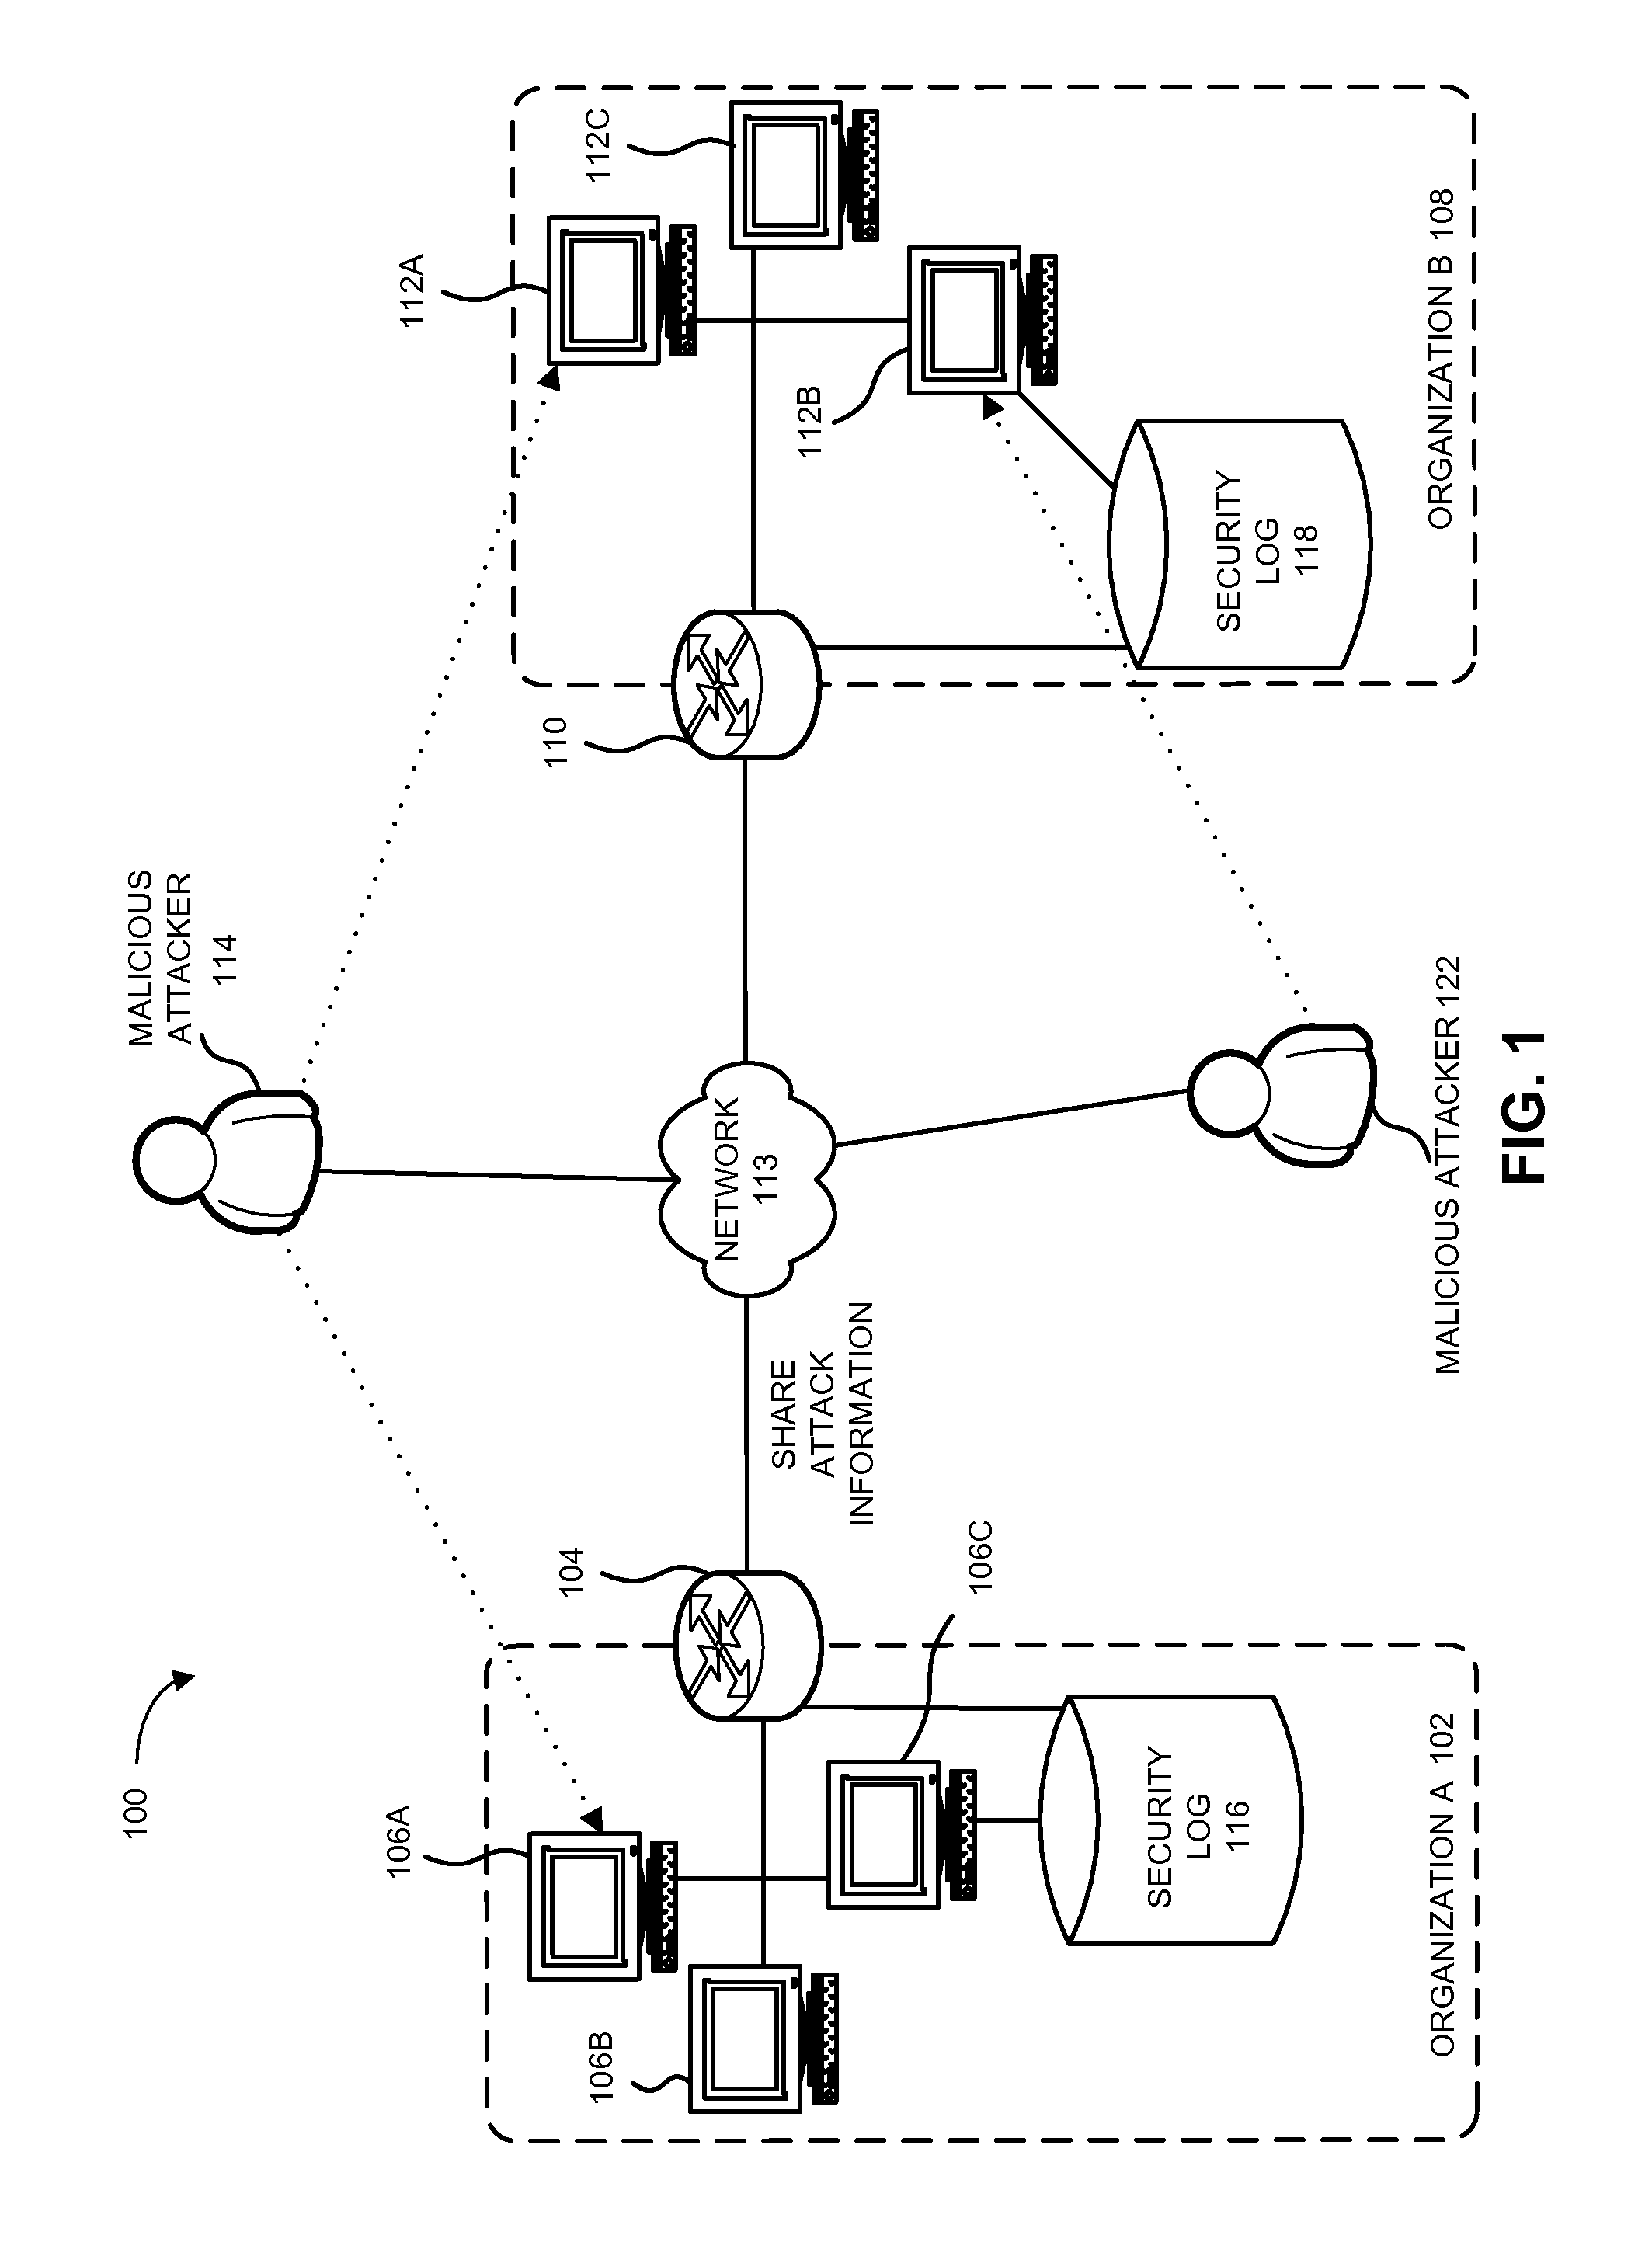 Method and apparatus for privacy and trust enhancing sharing of data for collaborative analytics